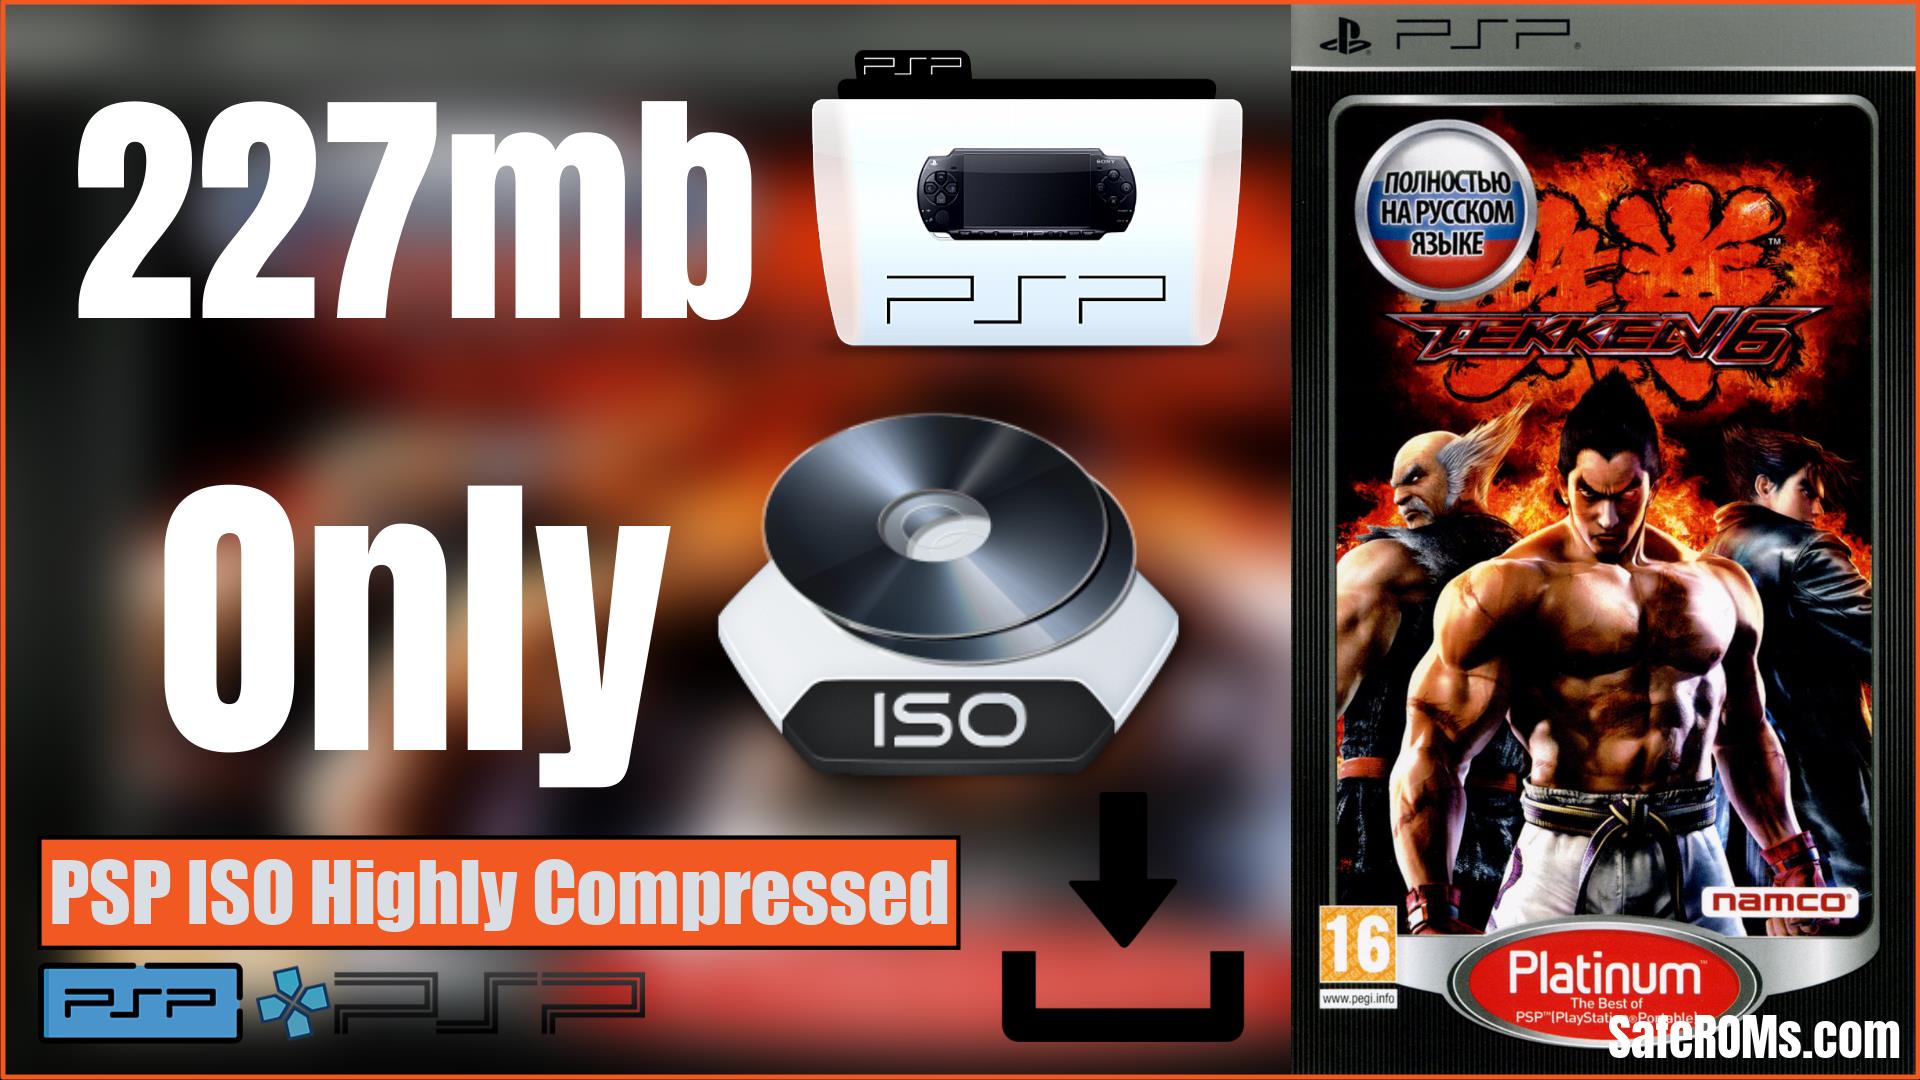 download game psp highly compressed pc